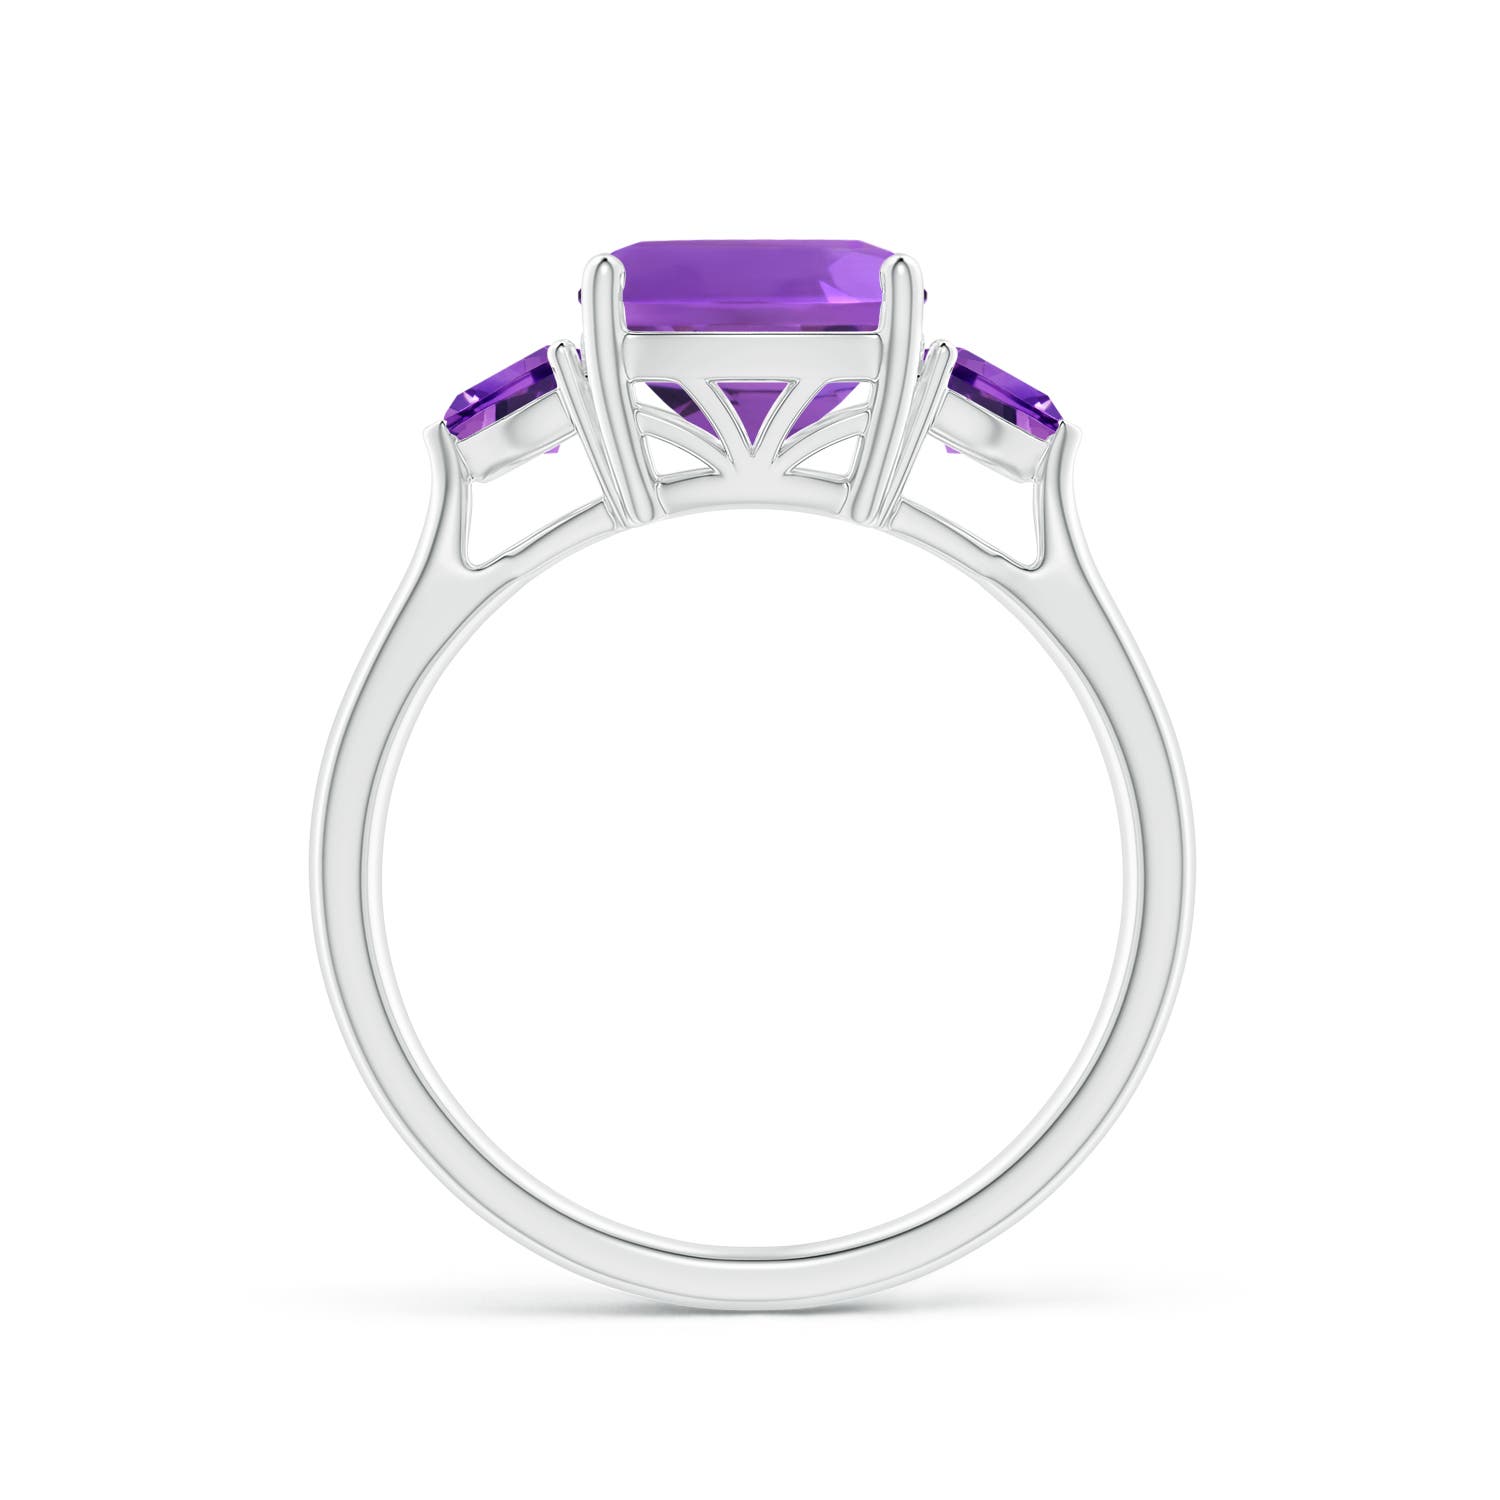 AAA - Amethyst / 2.6 CT / 14 KT White Gold